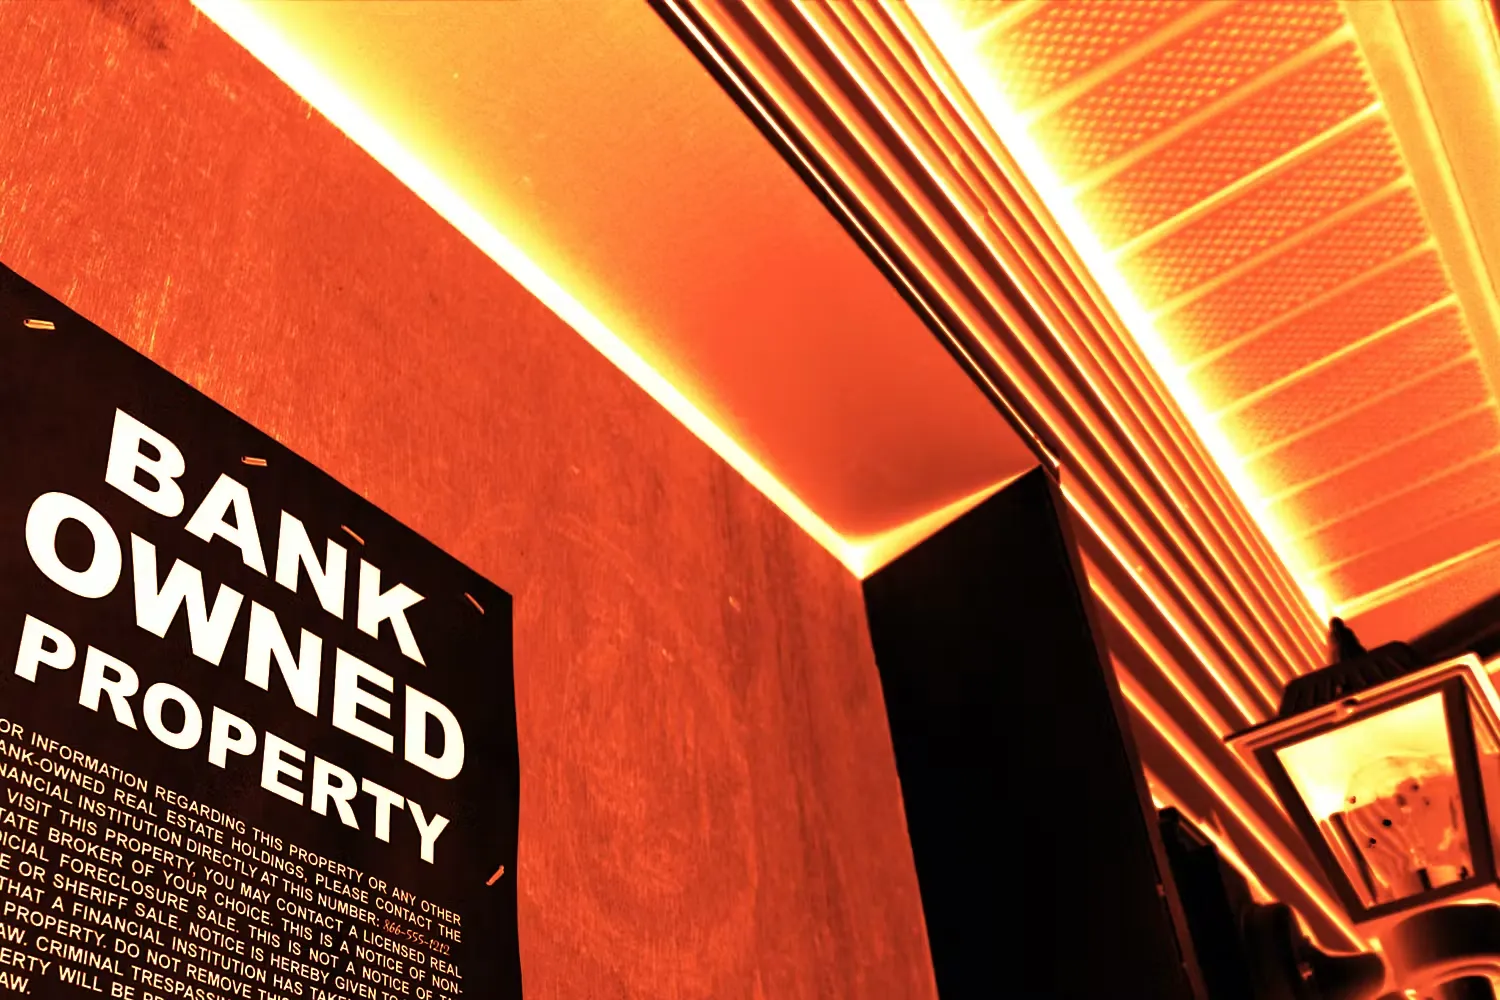 Sign on wall reading "Bank Owned Property"